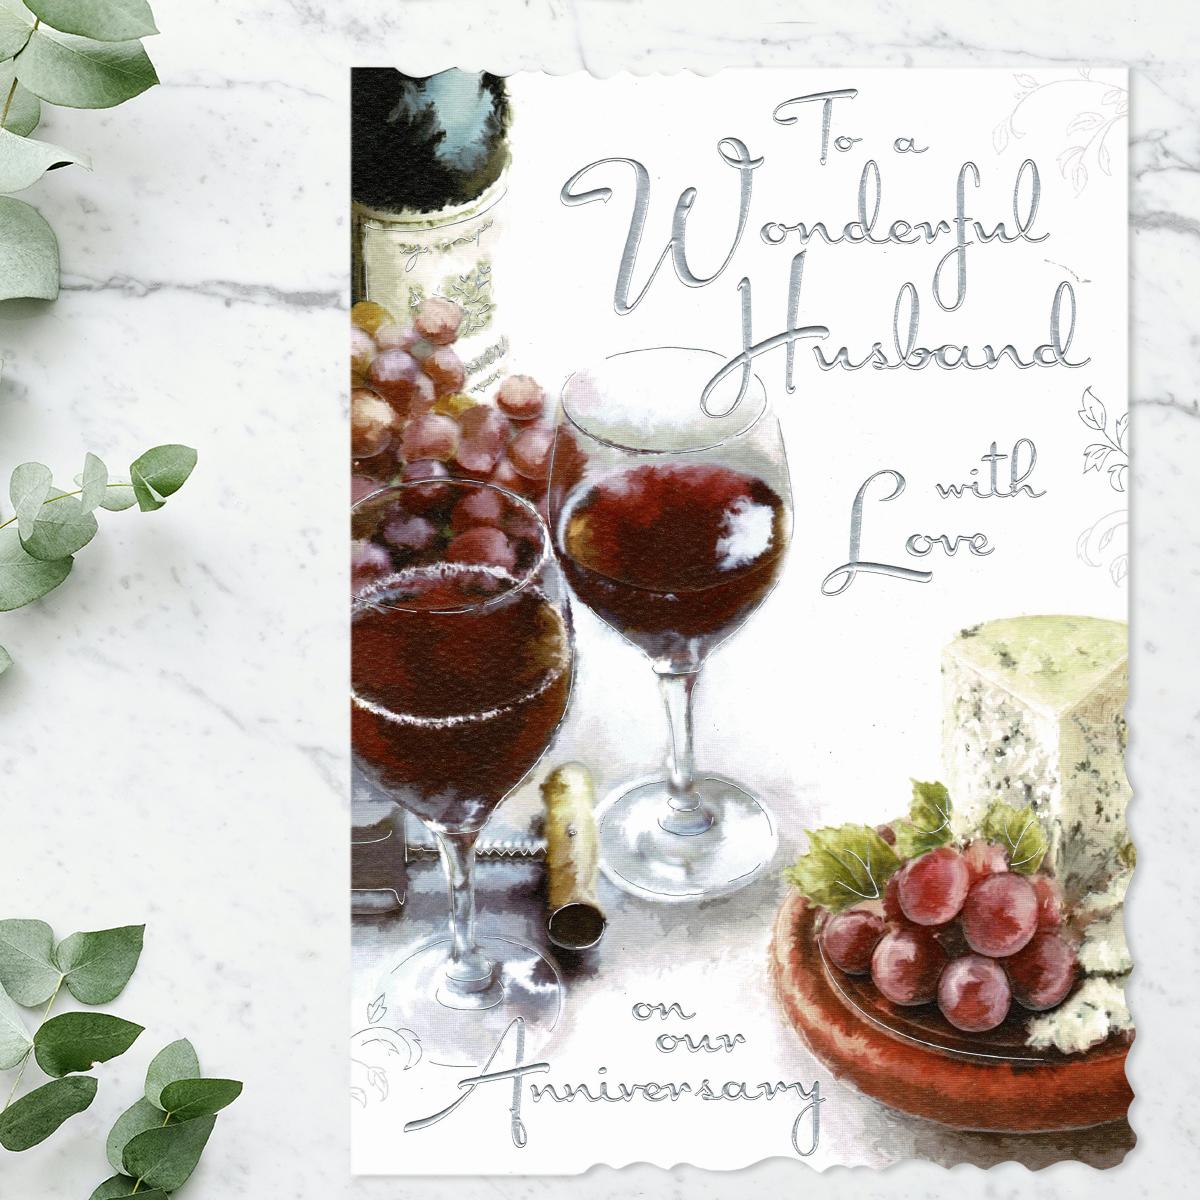 Wonderful Husband With Love On Our Anniversary Card Front Image